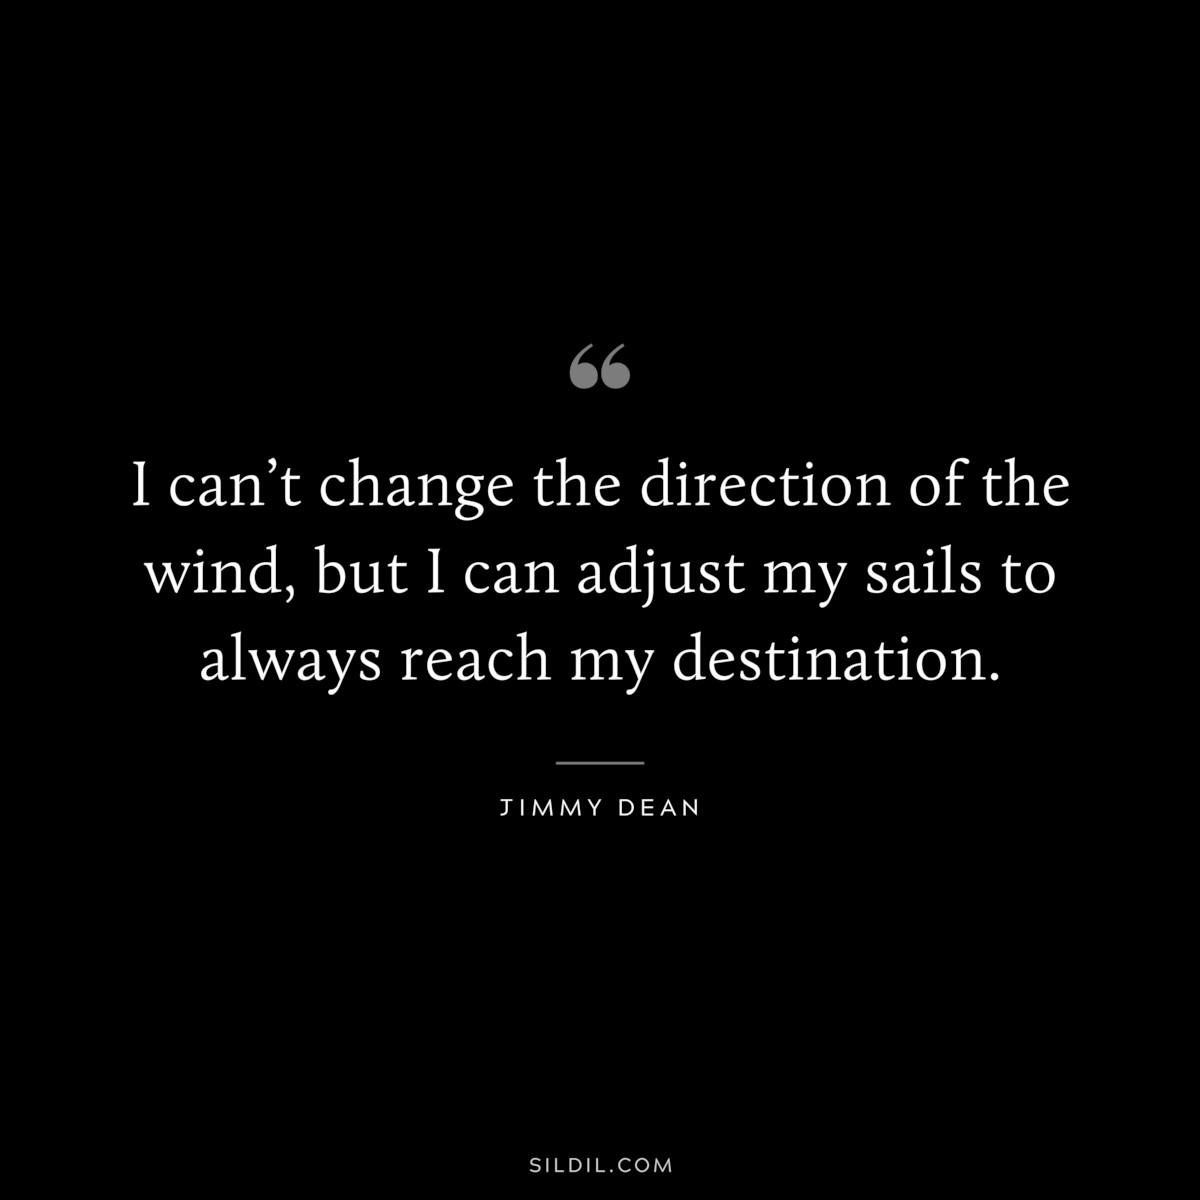 I can’t change the direction of the wind, but I can adjust my sails to always reach my destination. ― Jimmy Dean